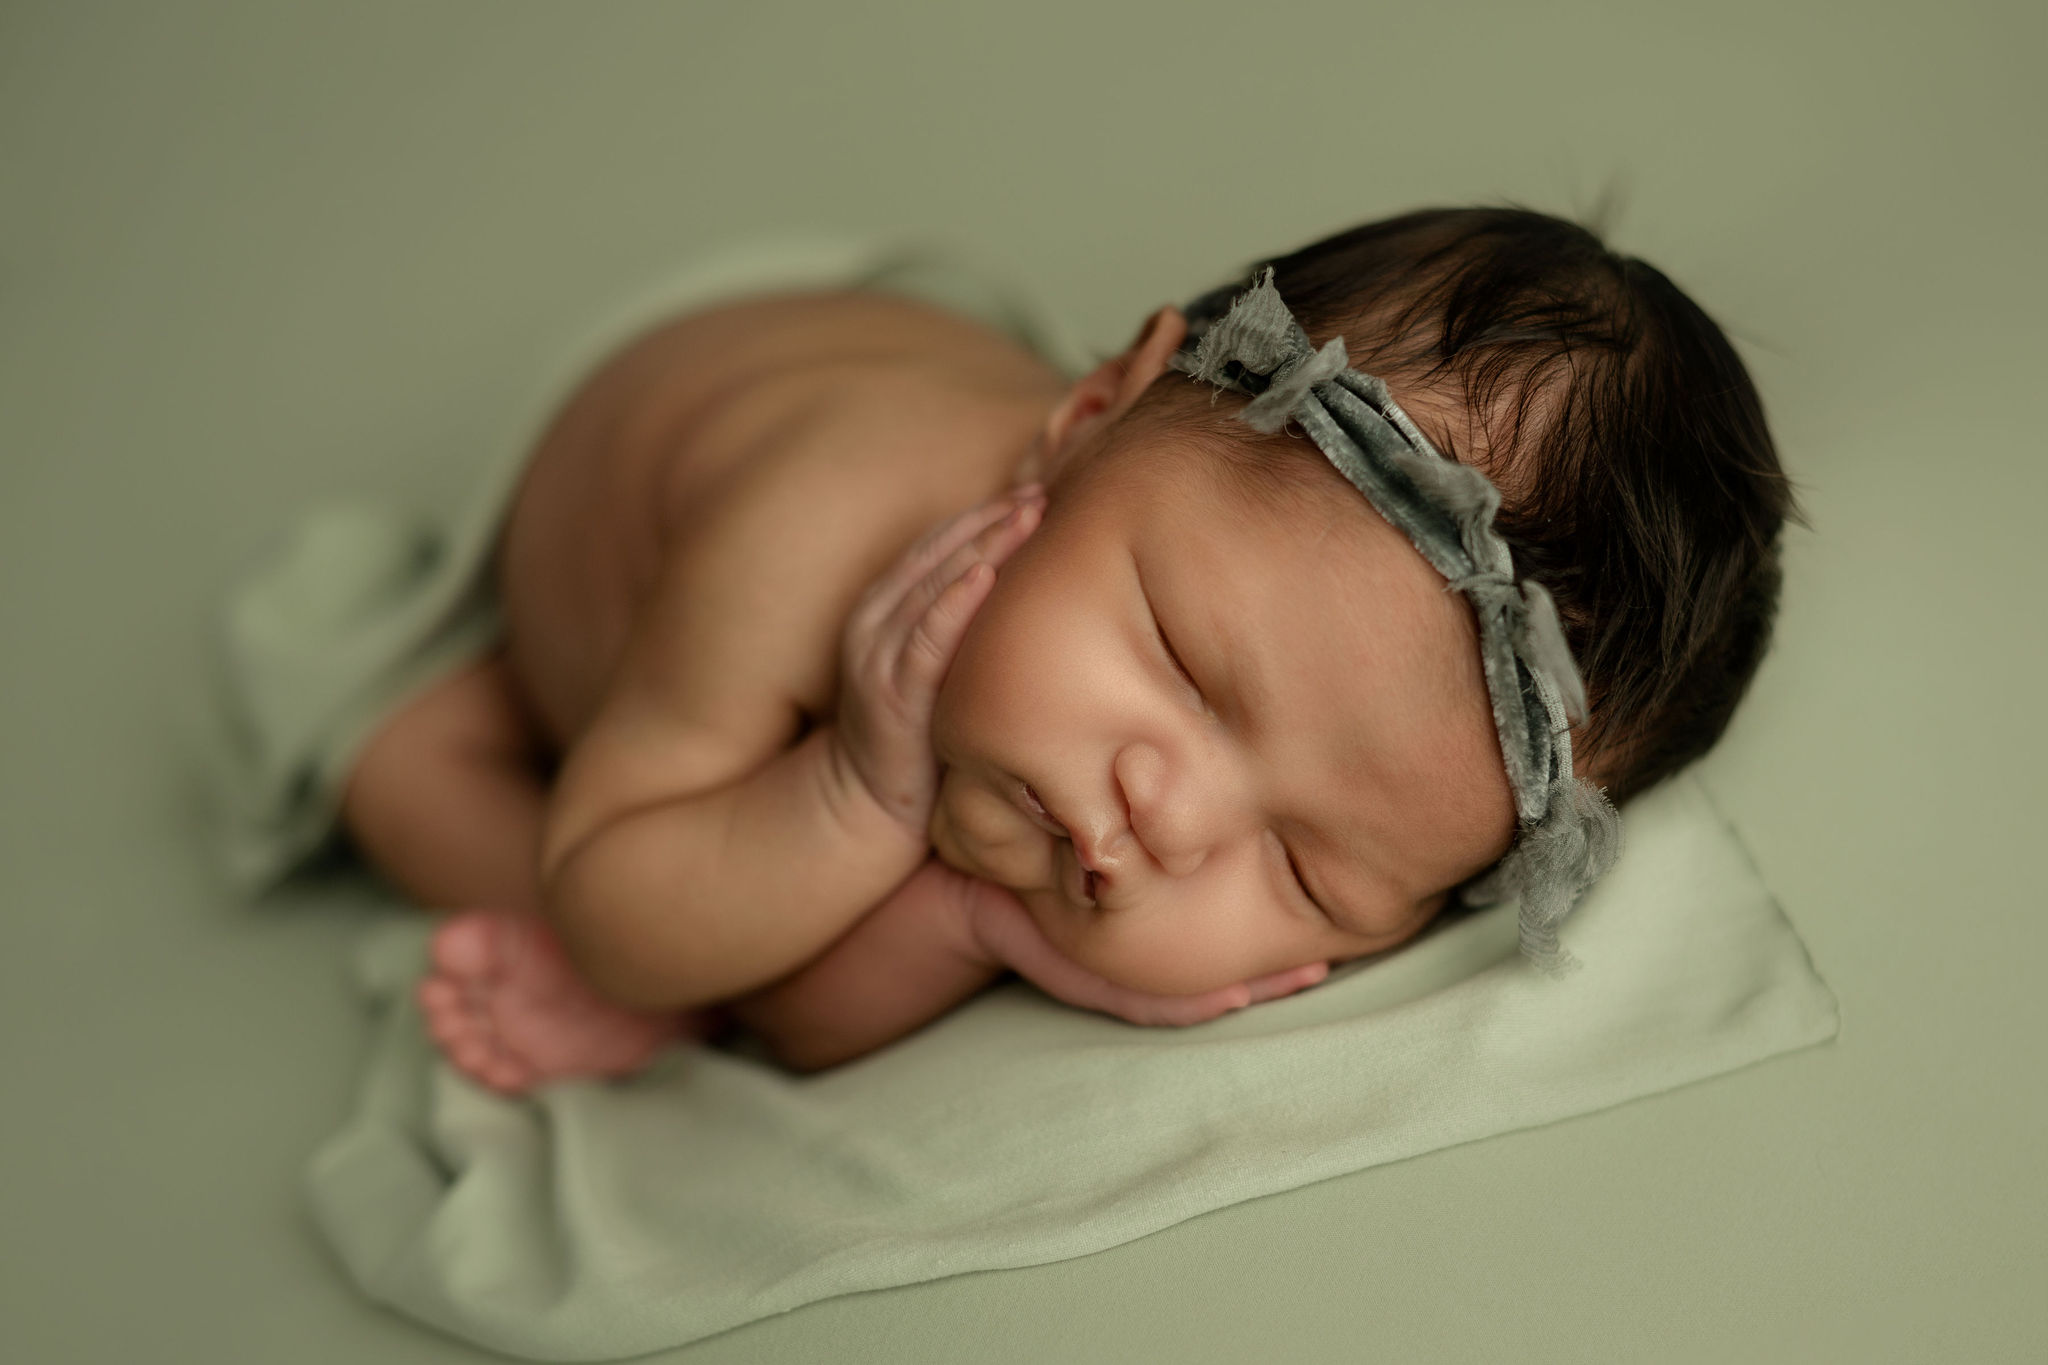 A newborn baby sleeps with hands placed on her cheeks in a green headband